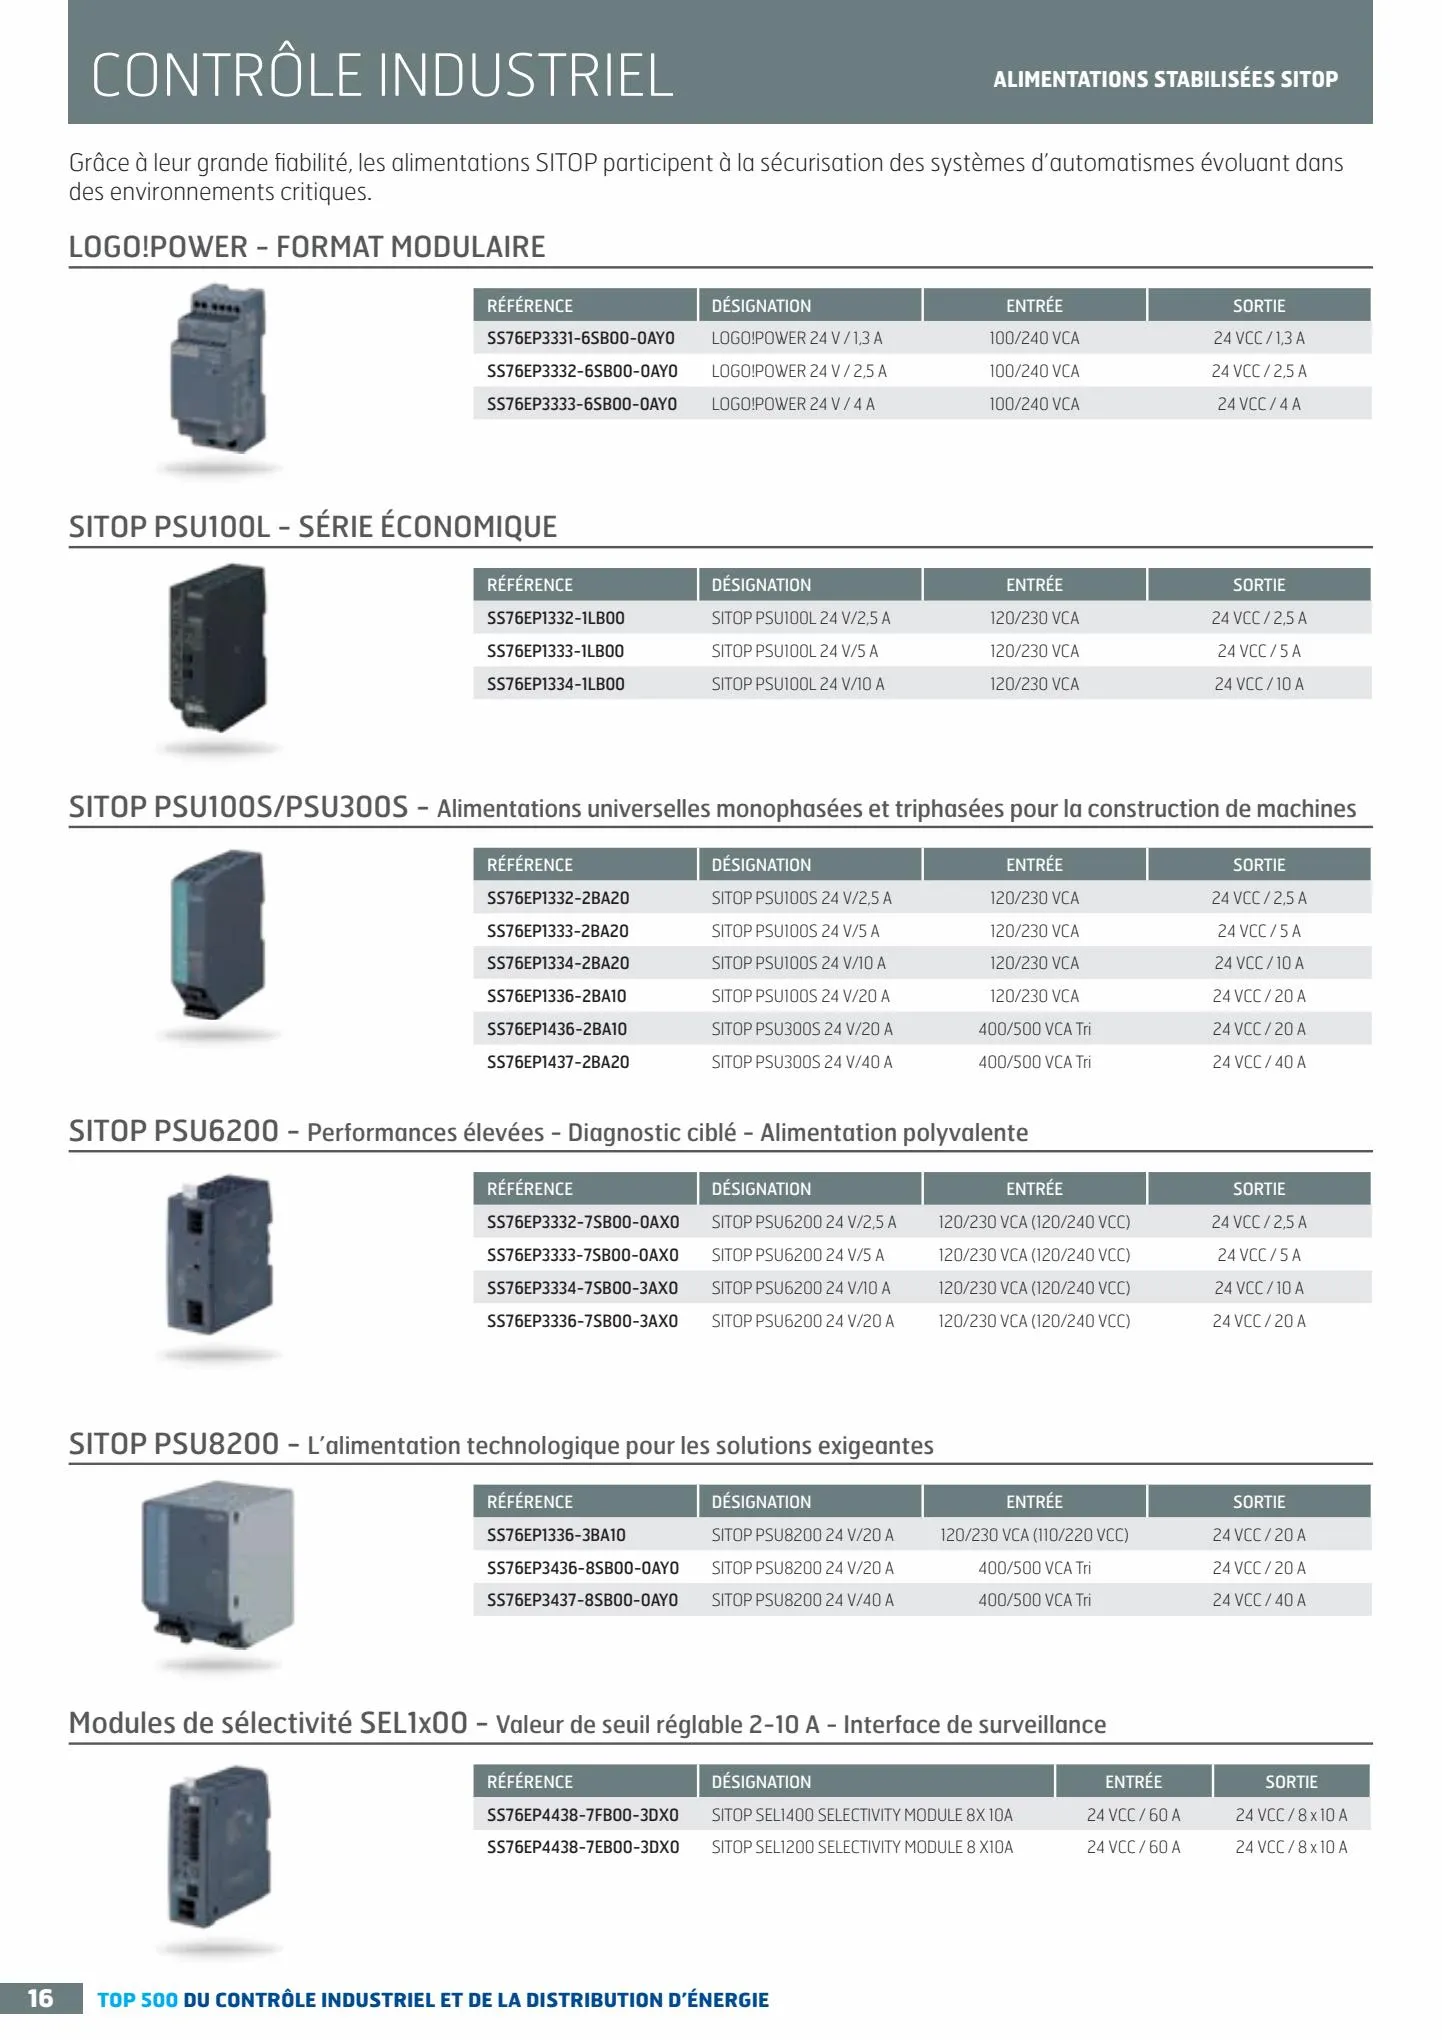 Catalogue TOP 500 siemens, page 00016